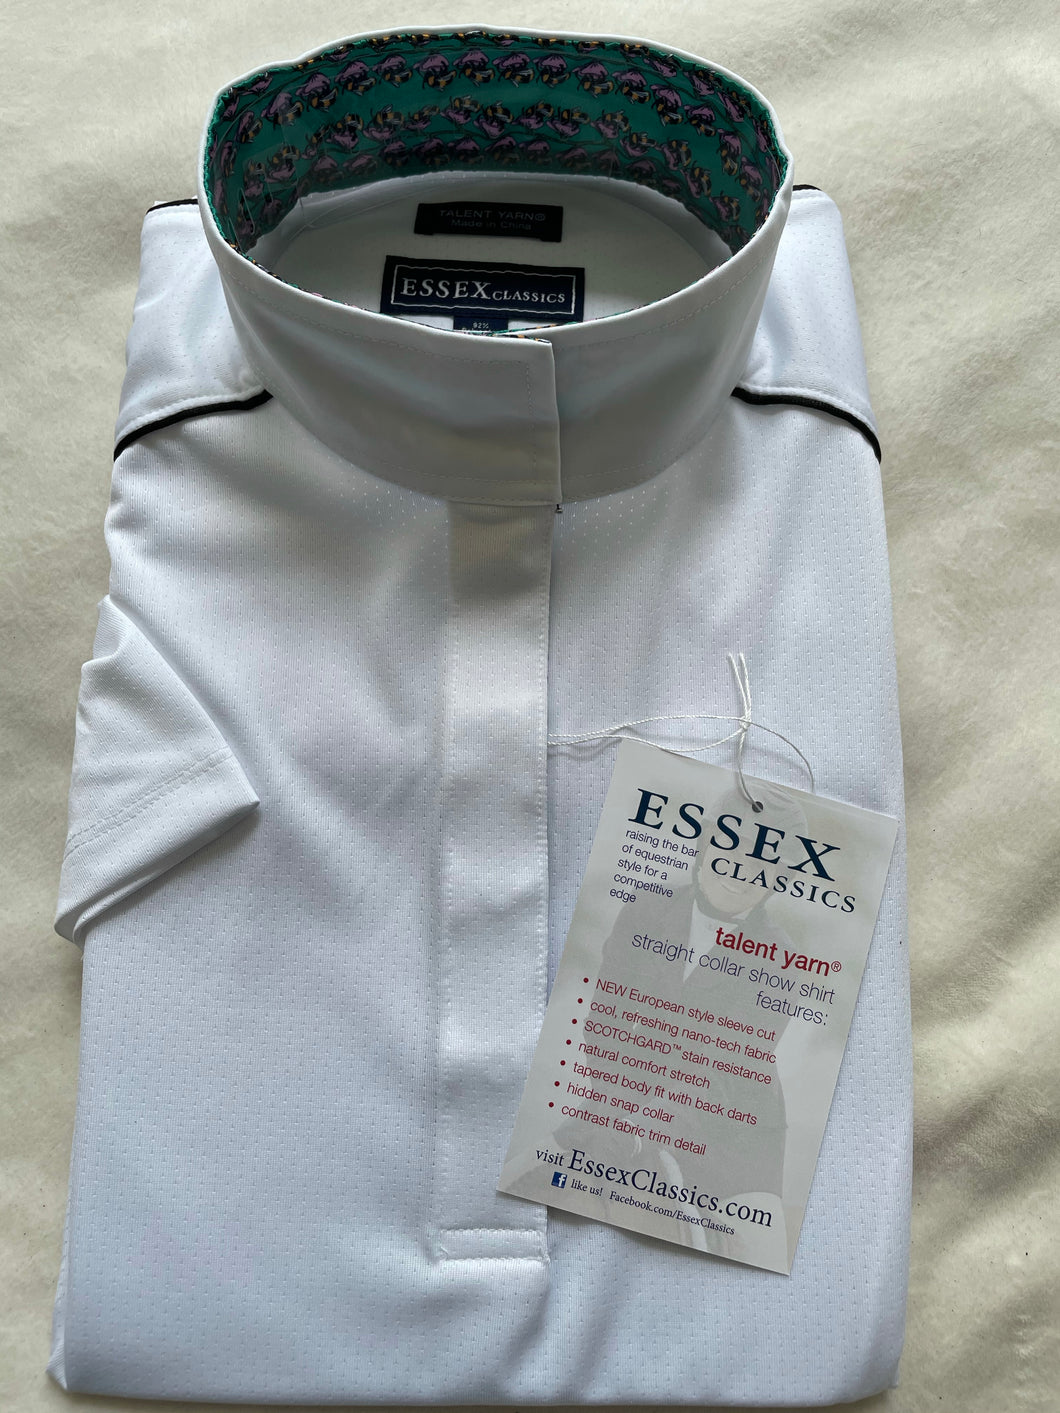 Essex Classics Short Sleeve (Seahorse), Size Large (New in Package)